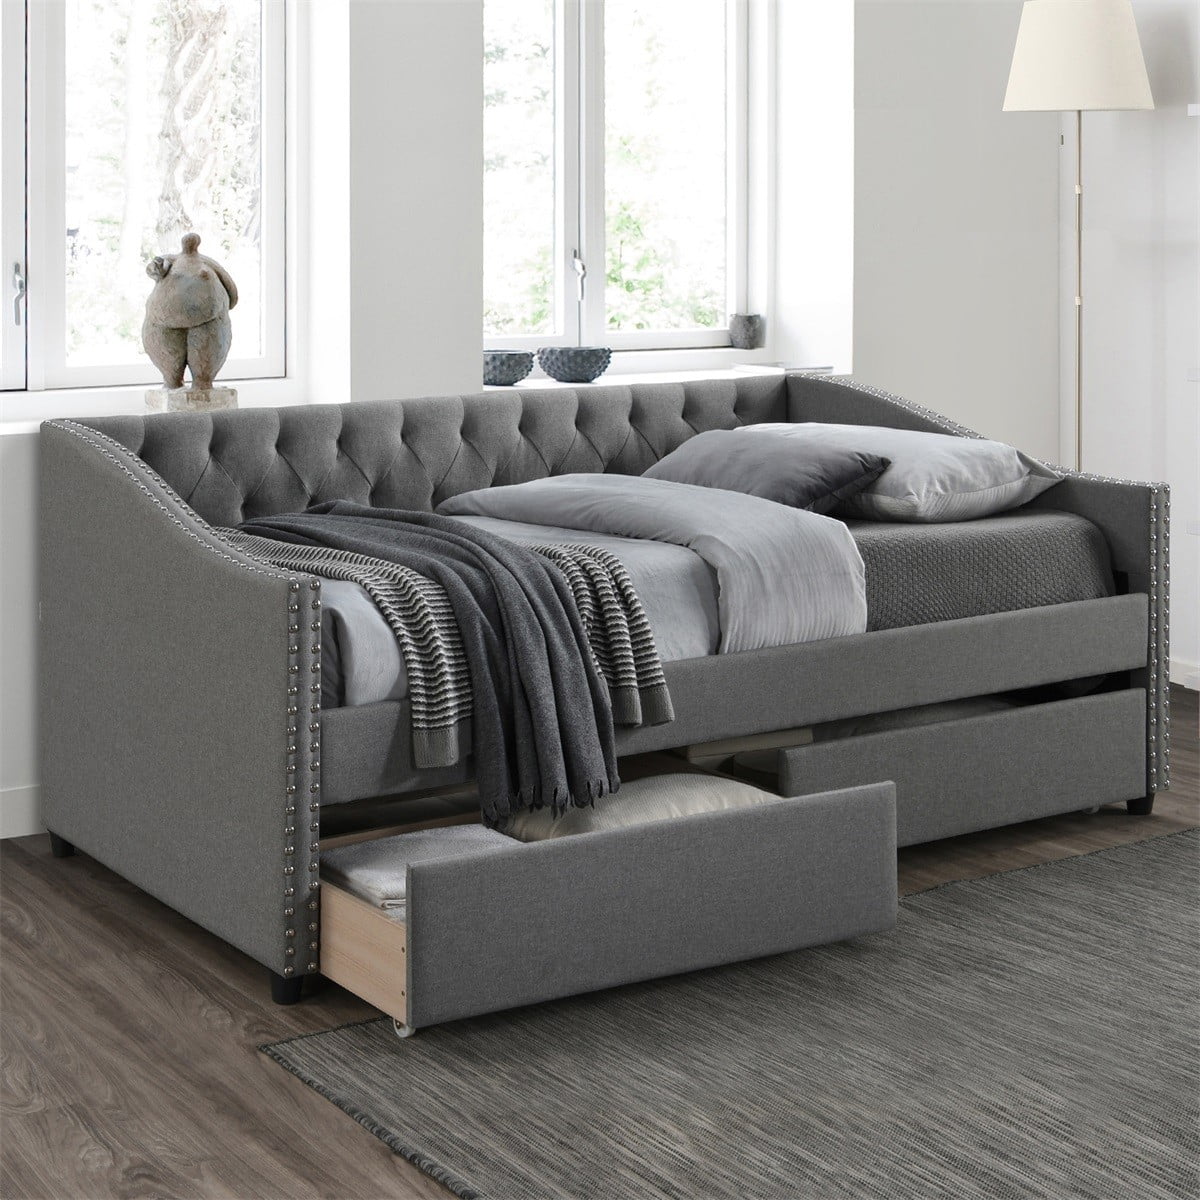 Unique Double Daybed for Living room